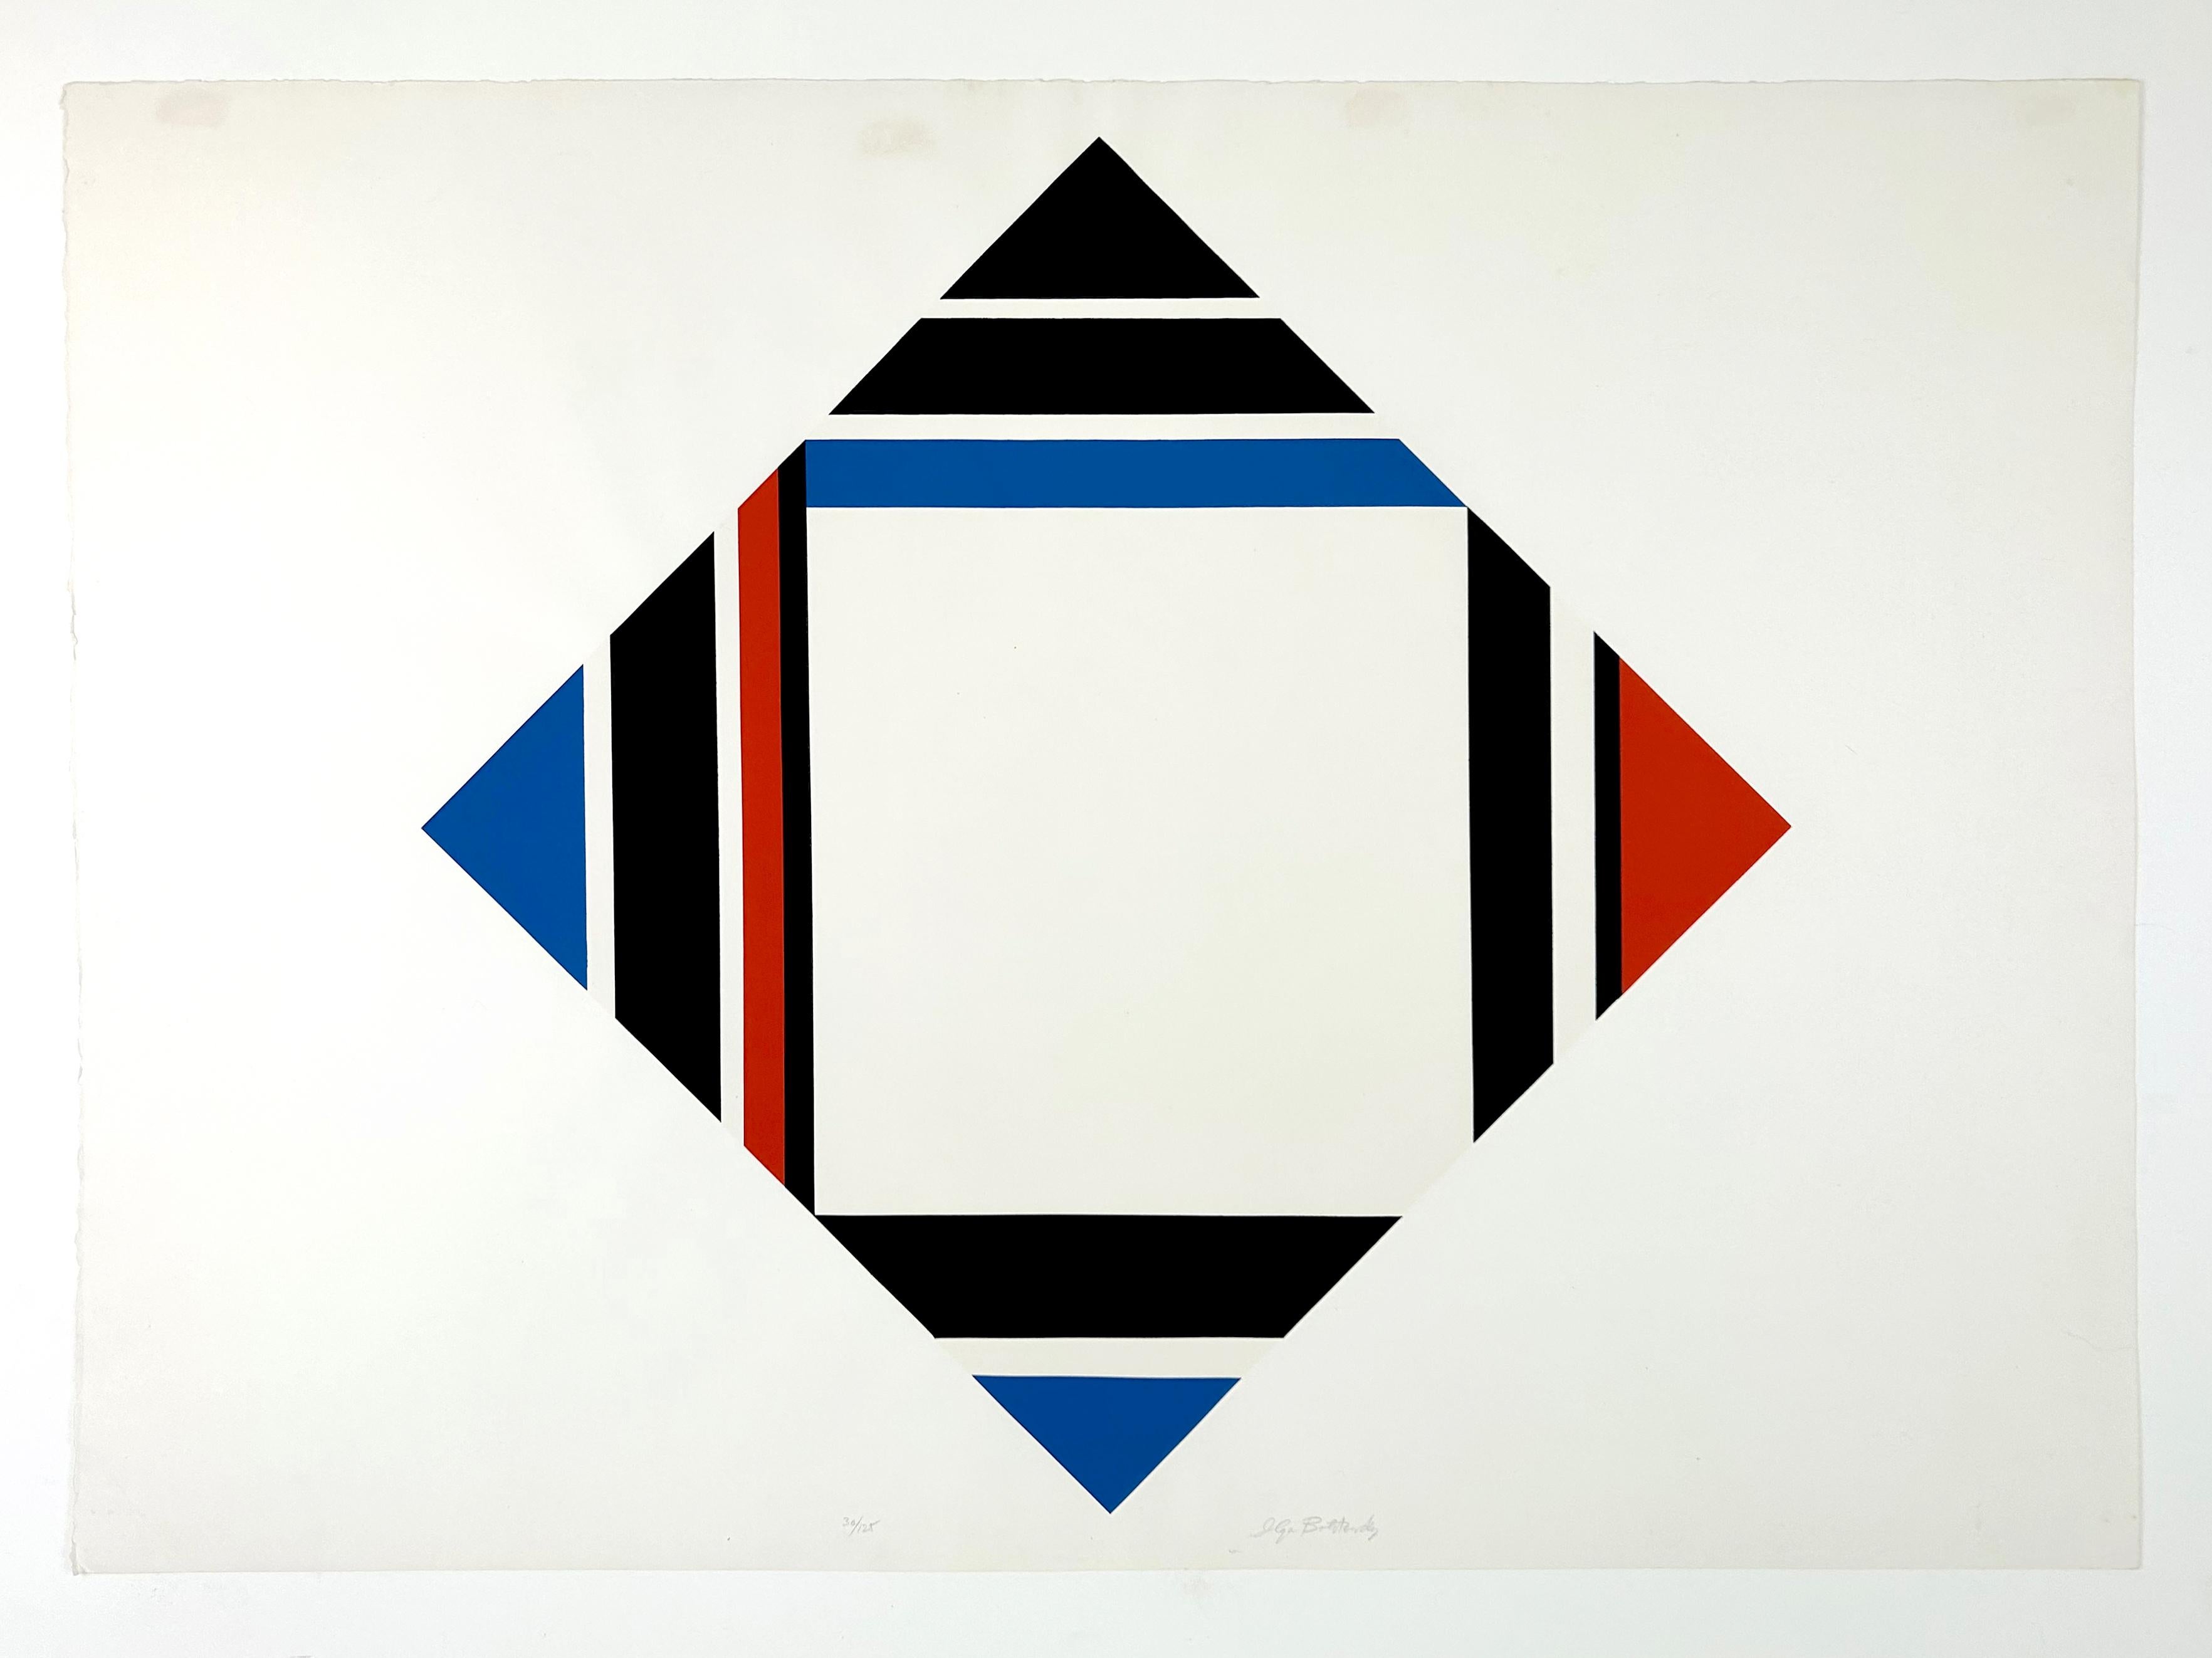 Artist: Ilya Bolotowsky
Title: Red/Blue/Black Diamond
Year: 1970
Dimensions: 25.75 in x 35.875 in
Signed lower right
Edition: 30/125
Gondition: Good. 4 small square spots on top of work from framing tape residue (and see verso). Slight warping of